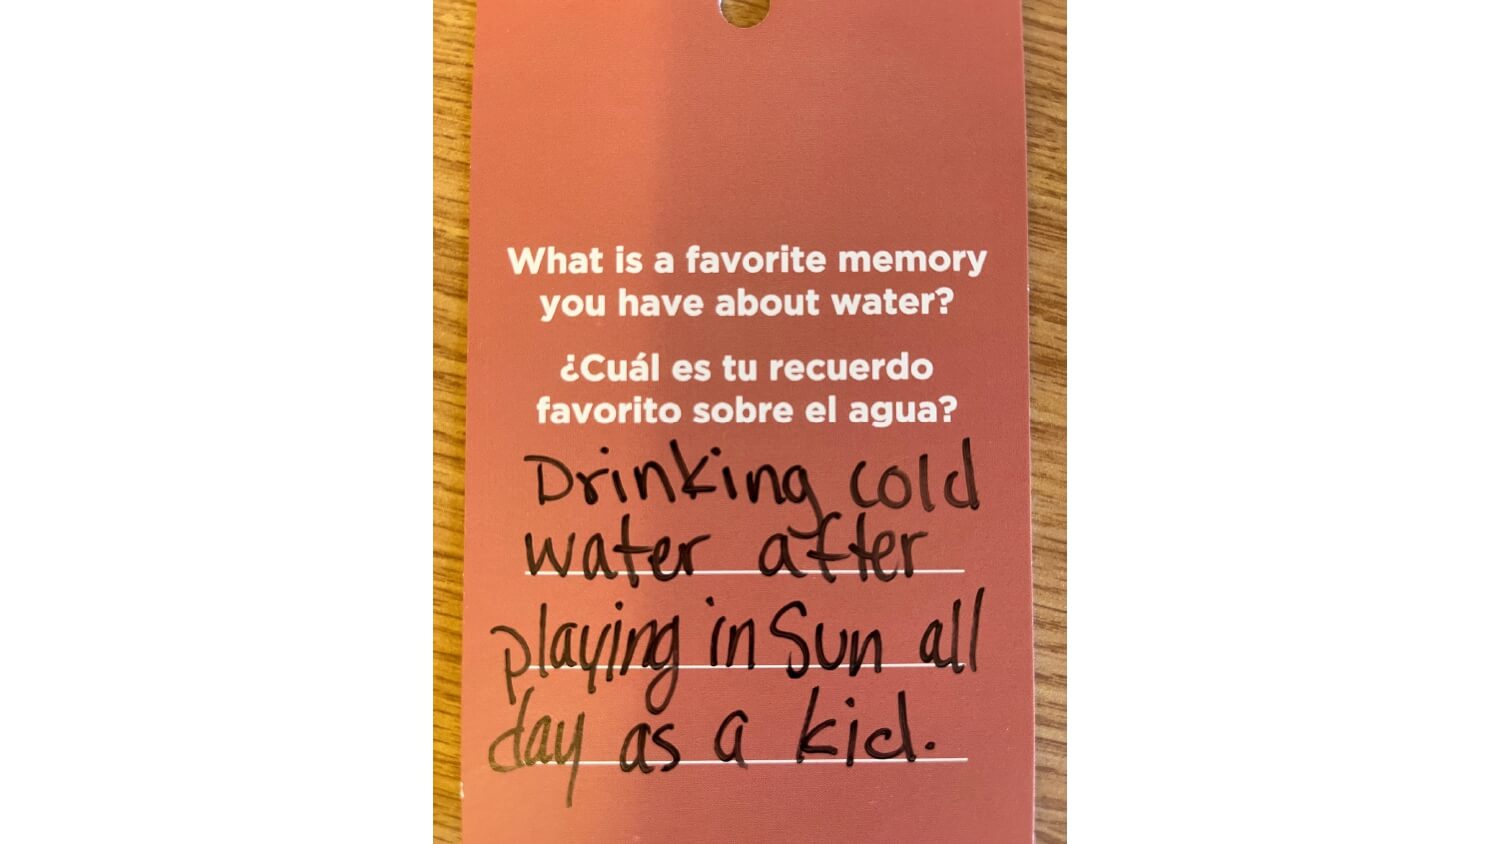 What is a favorite memory you have about water? Drinking cold water after playing in sun all day as a kid.